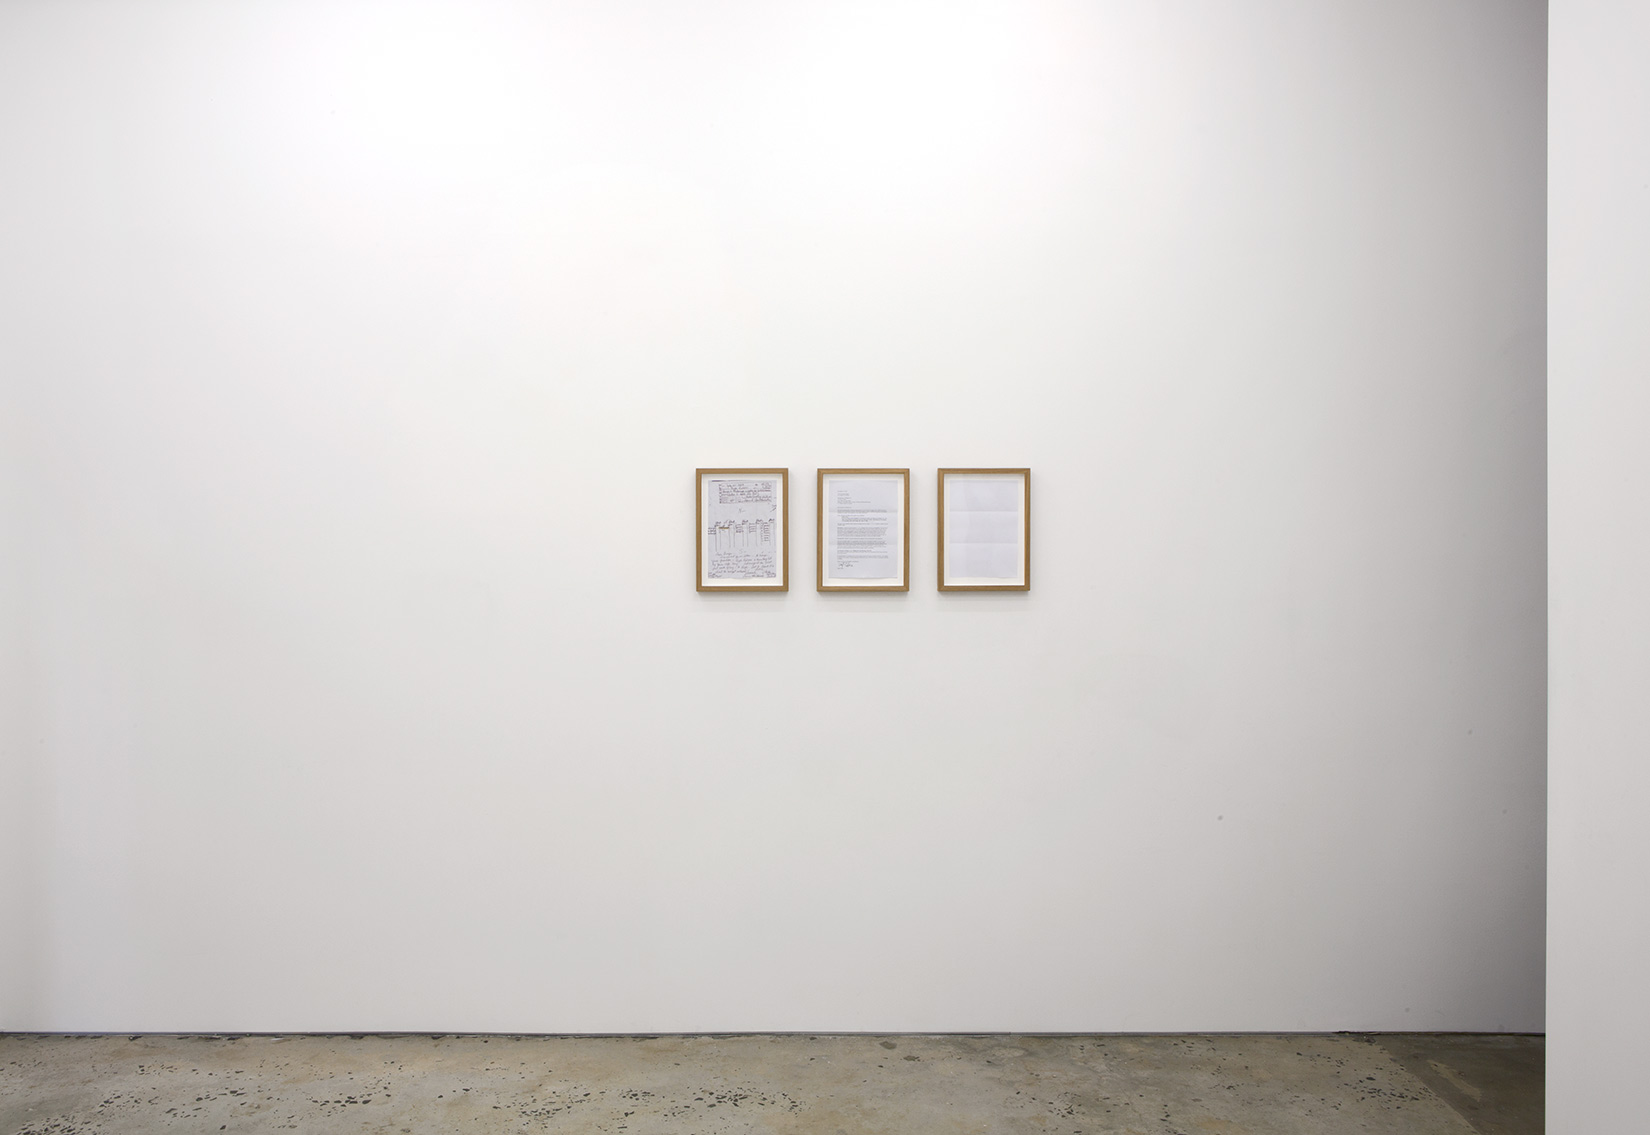 Leigh Ledare, "Upon the Death of My Grandfather", (July 29, 2008 – August 17, 2011), paper, 3 pieces, 210 × 297 mm each (framed)